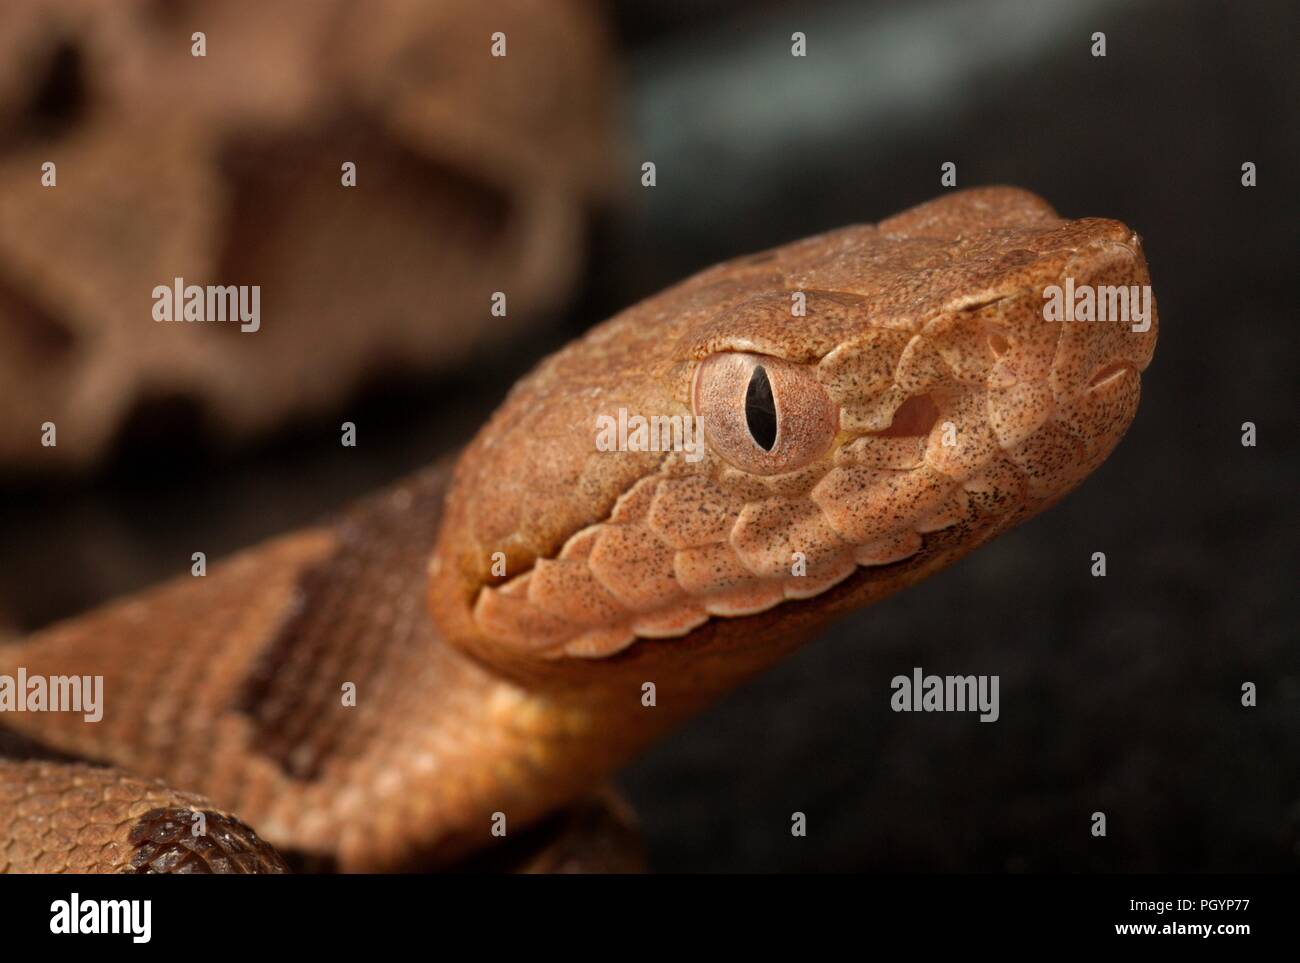 Photograph showing a close-up, profile view of the brown and tan patterned head and eye of a juvenile, venomous, Southern copperhead snake (Agkistrodon contortrix) image courtesy CDC/James Gathany, 2008. () Stock Photo